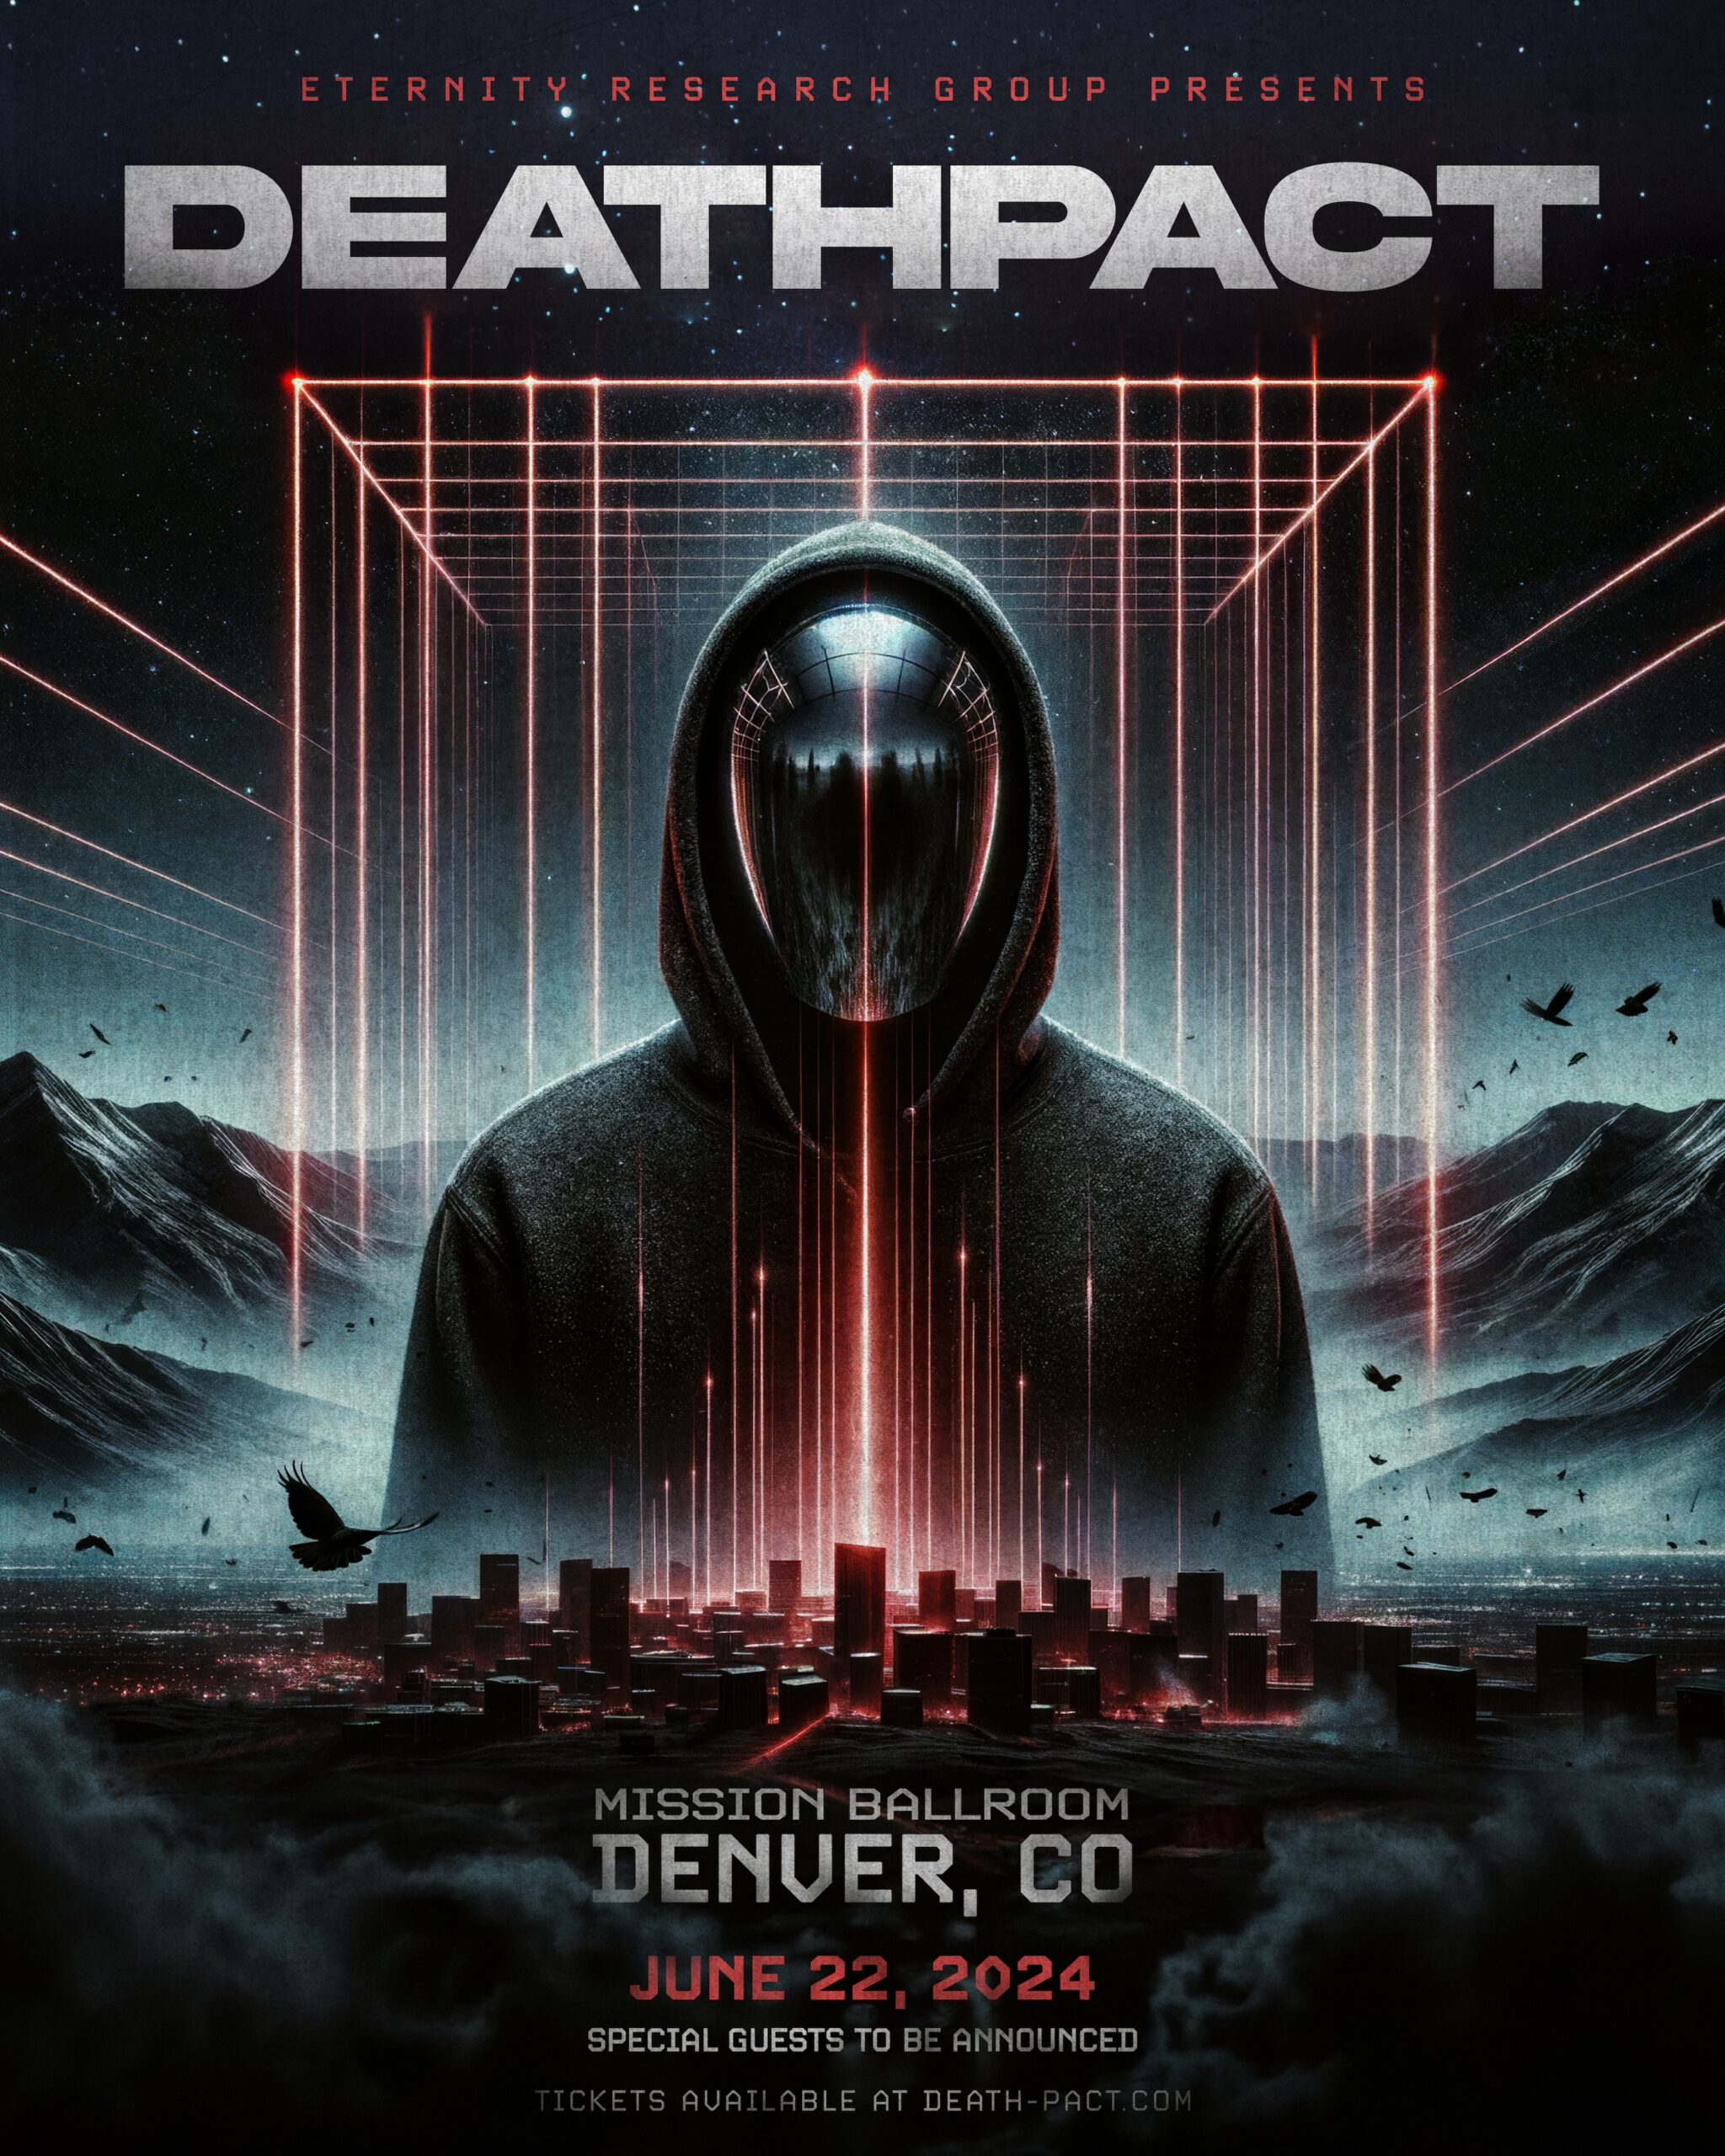 DEATHPACT ANNOUNCES ETERNITY RESEARCH GROUP EXPERIENCE ALONGSIDE SHOW AT MISSION BALLROOM IN DENVER